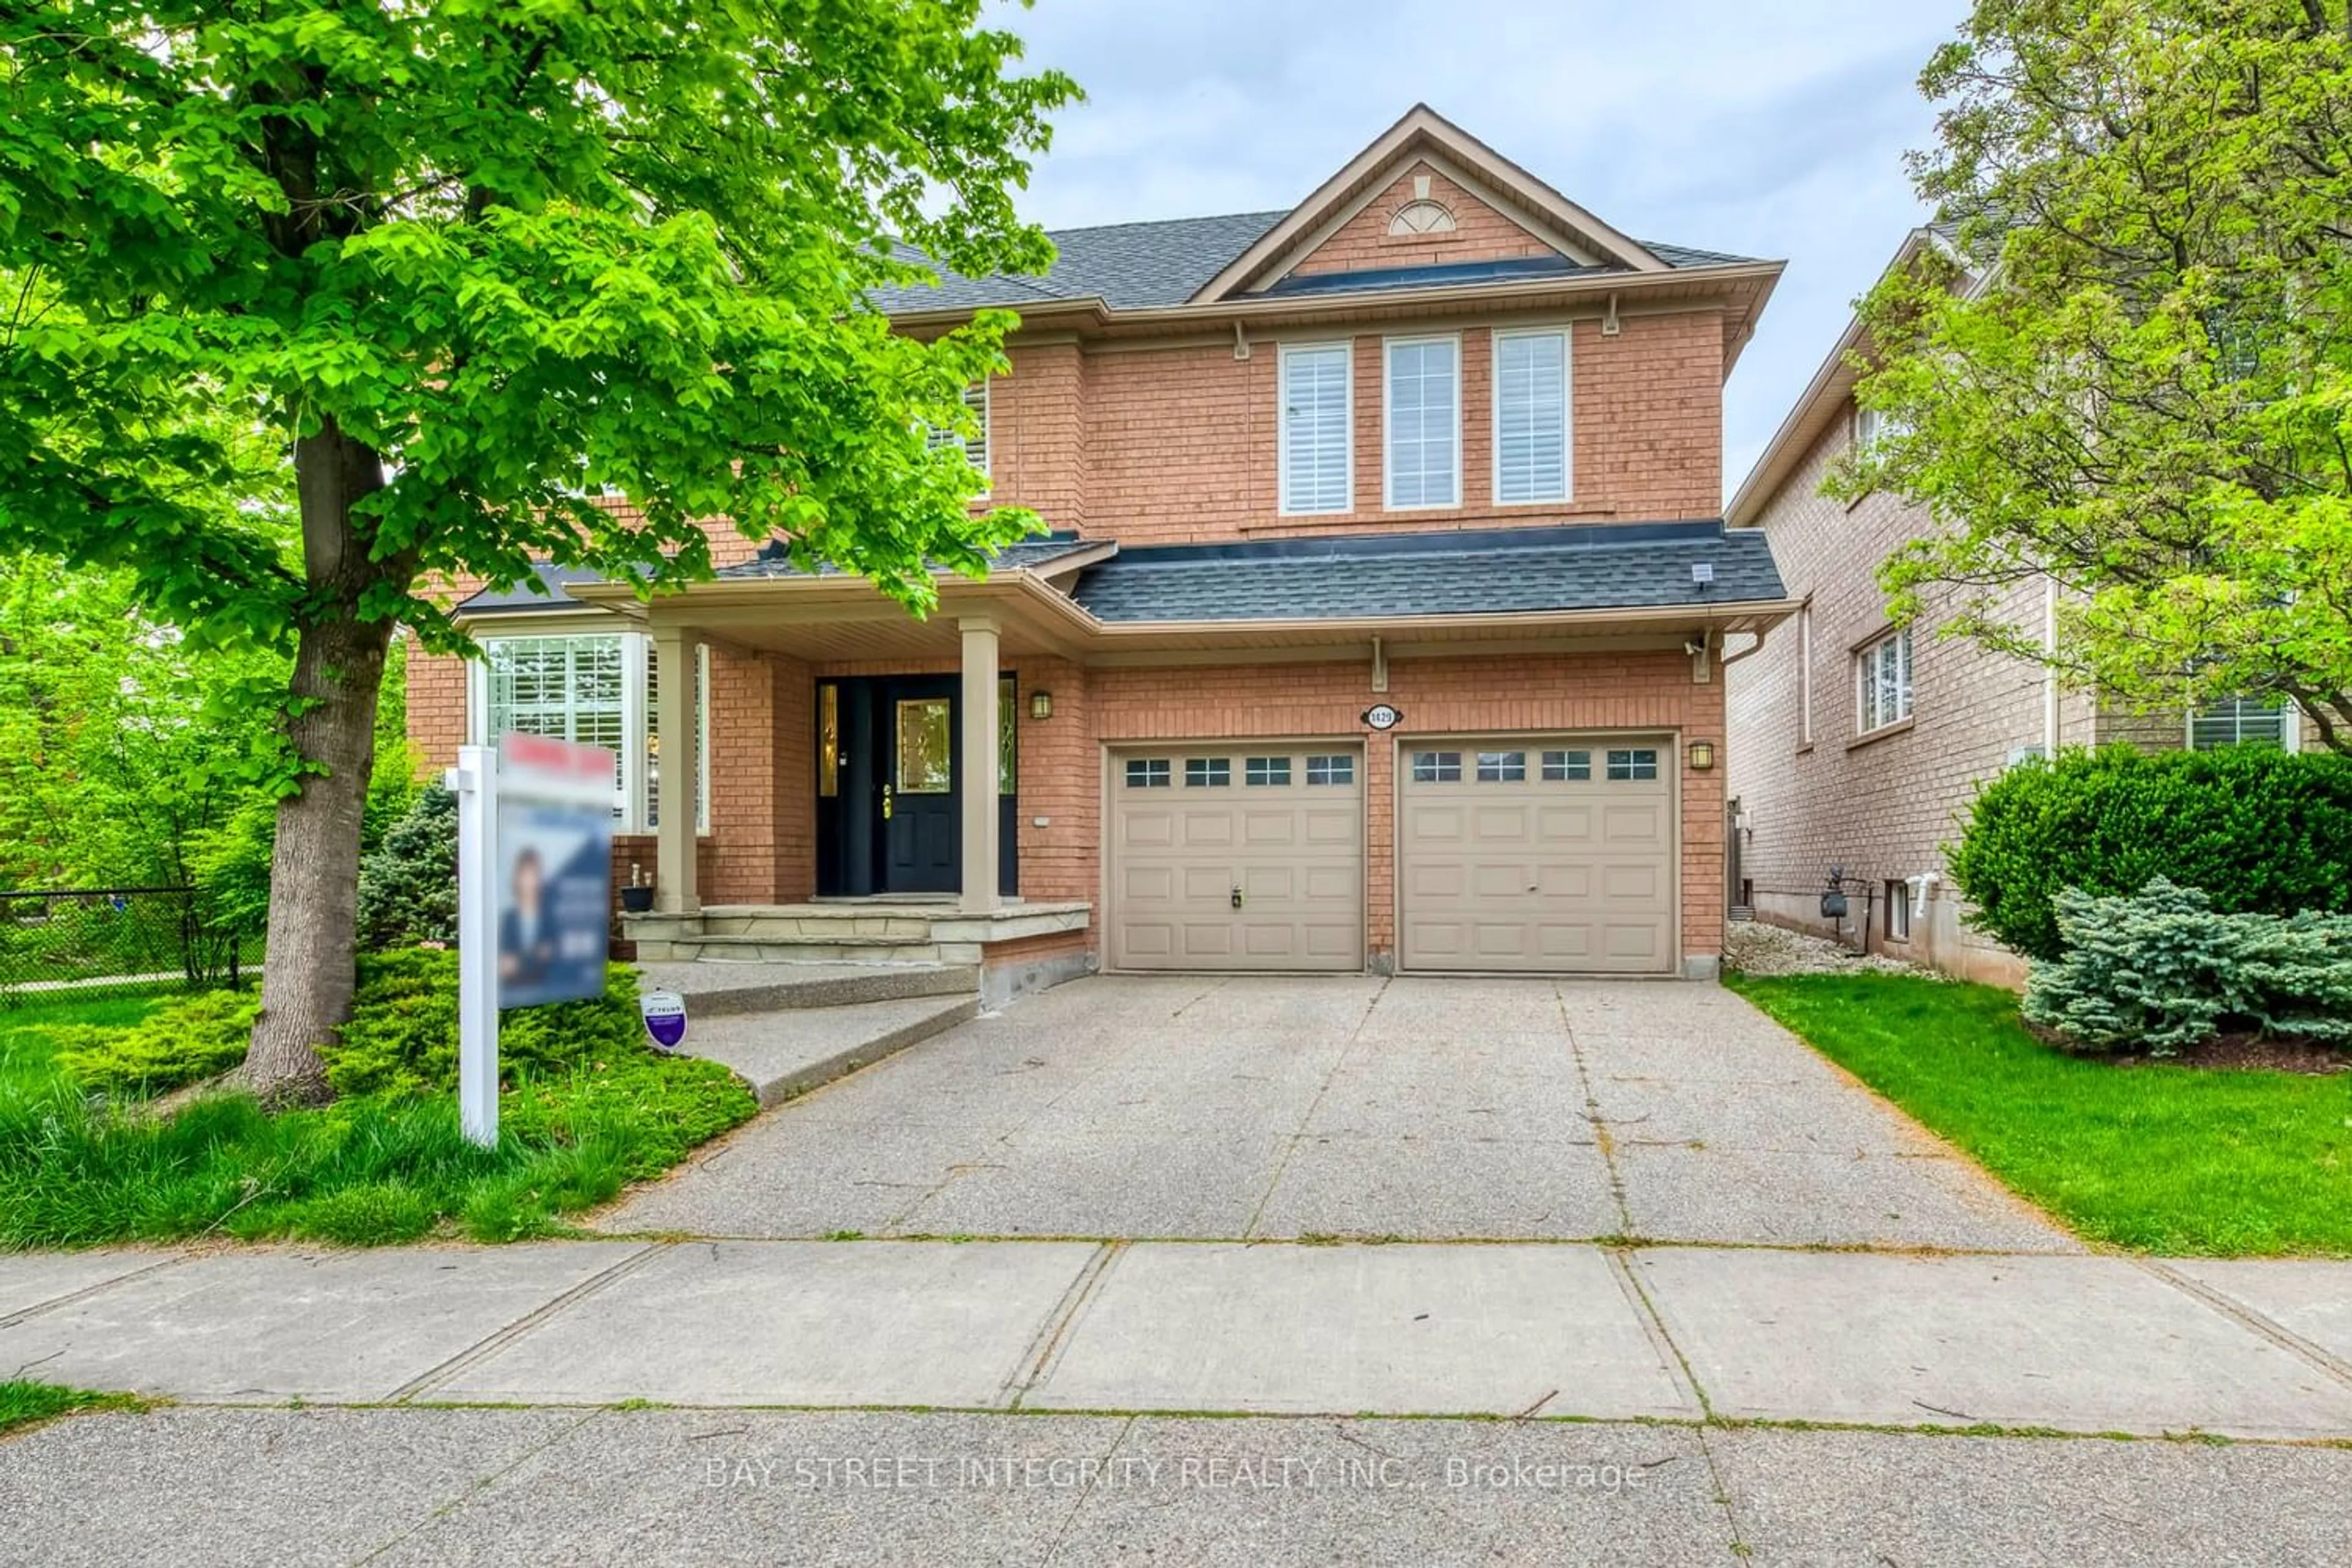 Home with brick exterior material for 1429 Pinecliff Rd, Oakville Ontario L6M 3Z2